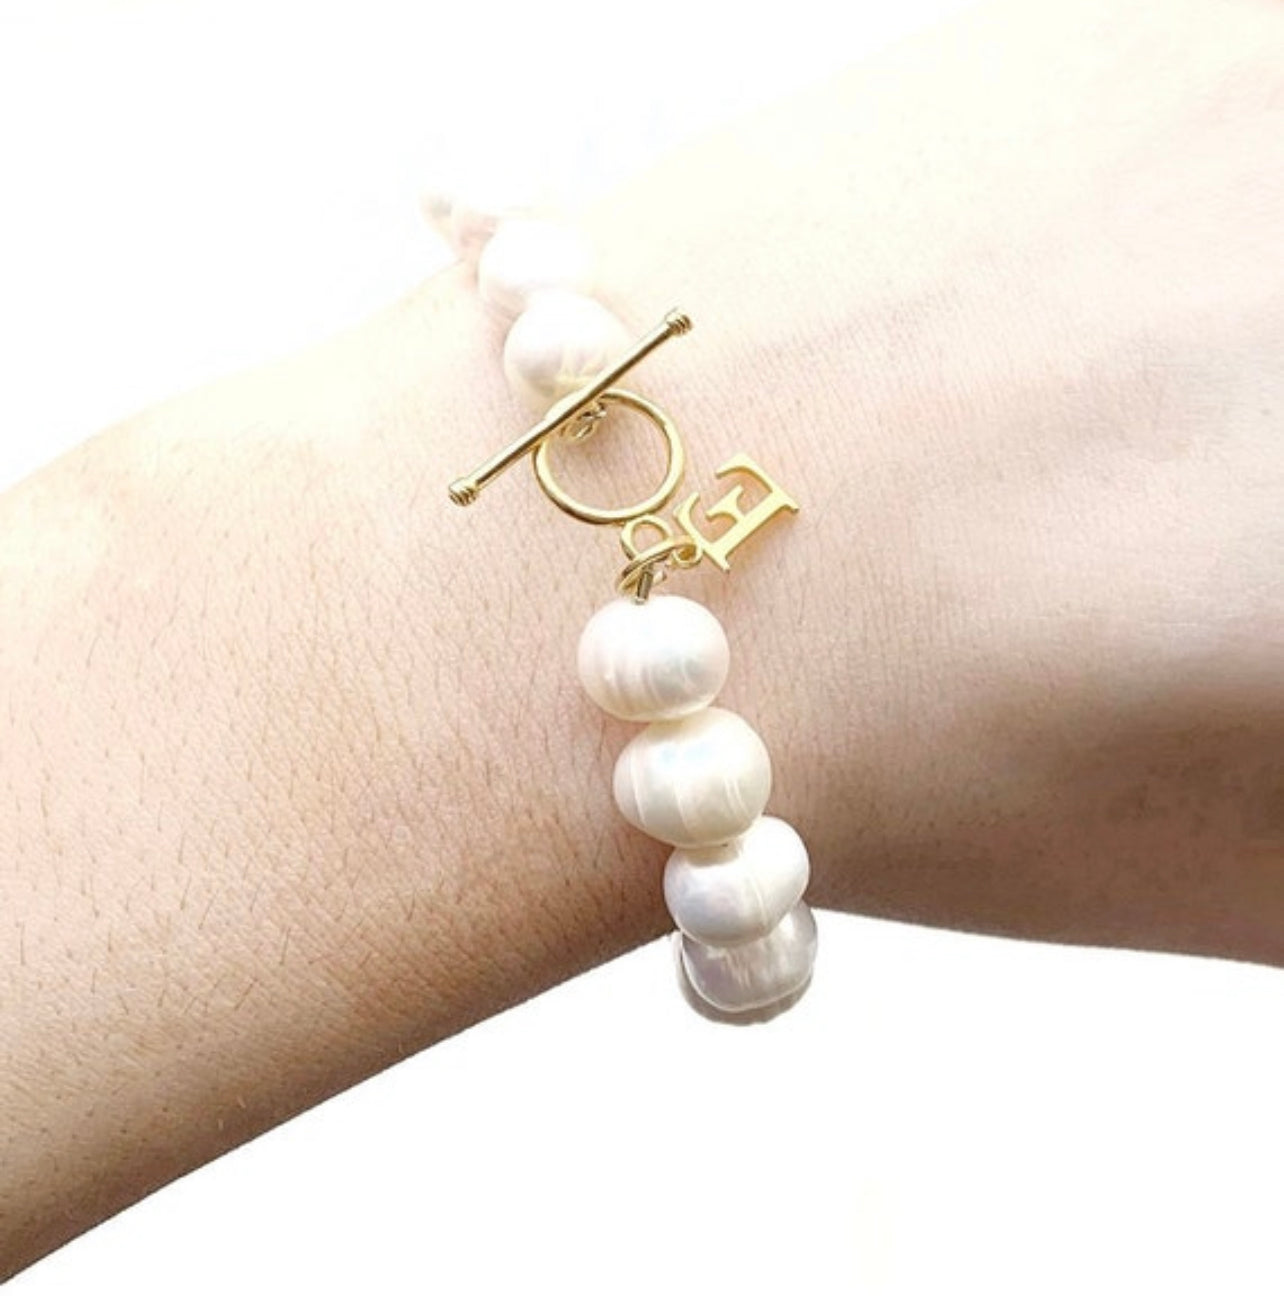 Personalized name charm bracelet, freshwater pearl bracelet, gold initial letter jewelry, personalized birthday gifts, pearl charm bracelet